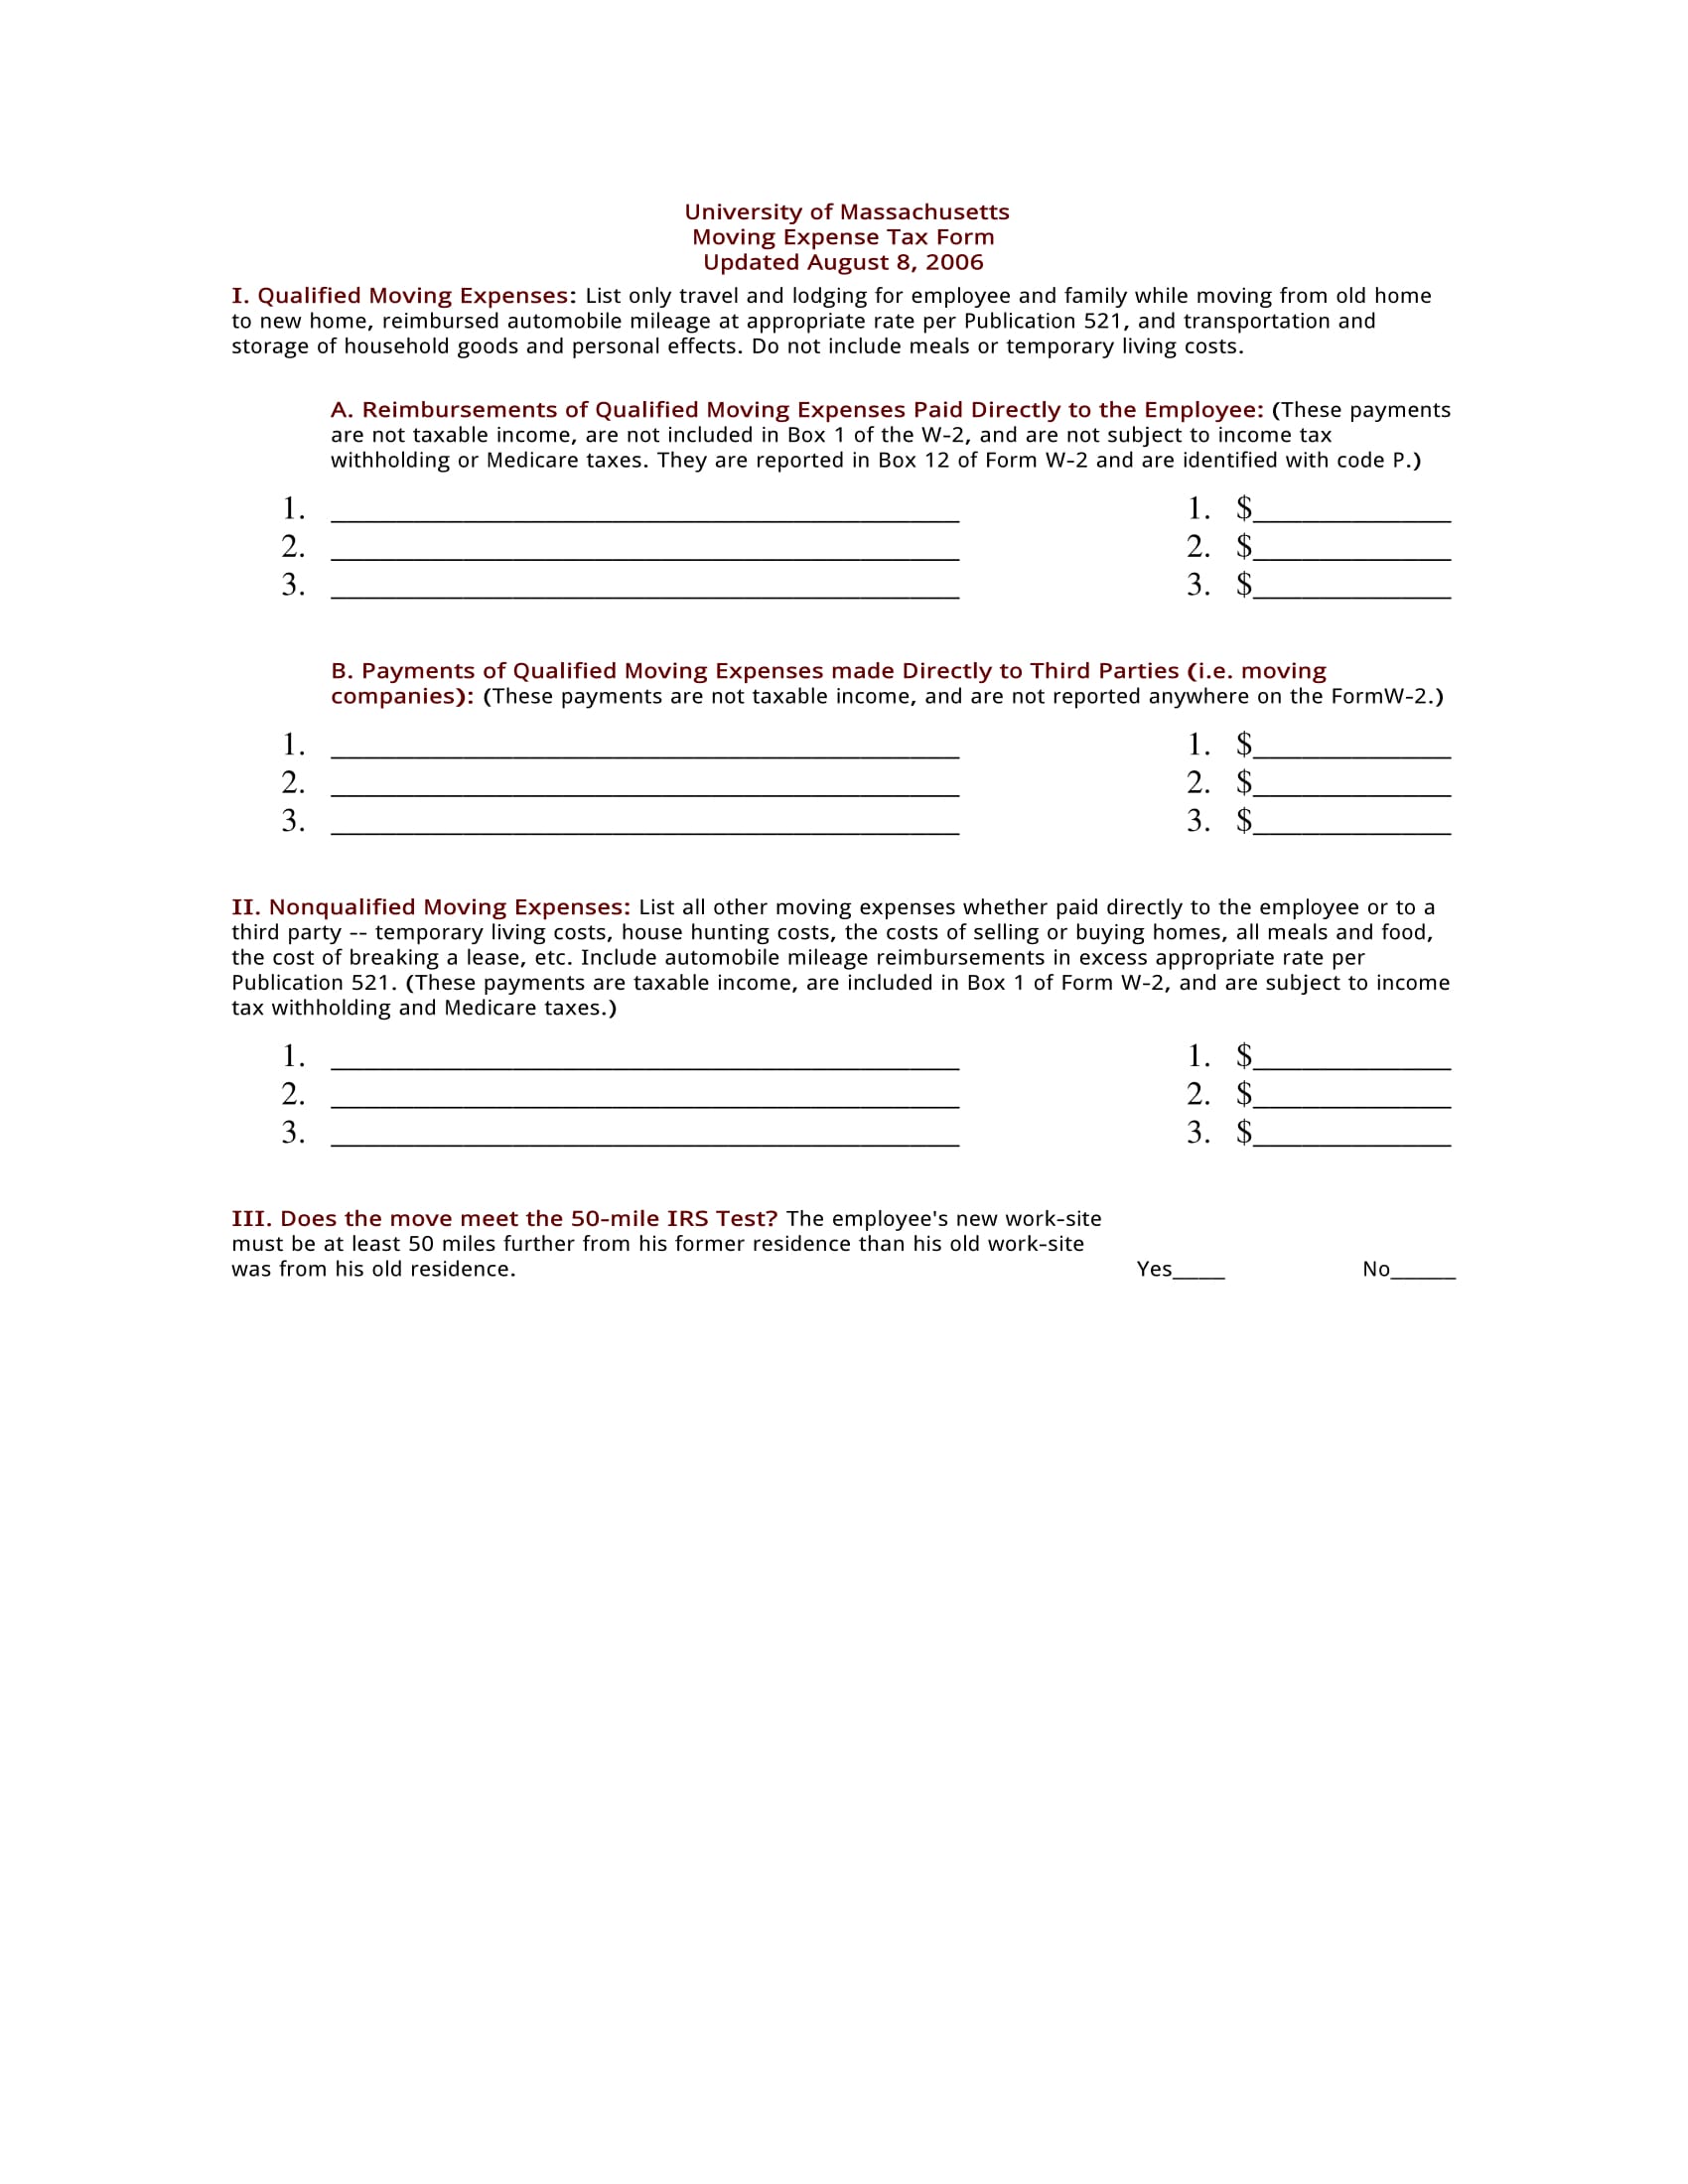 employee moving expense tax form 1